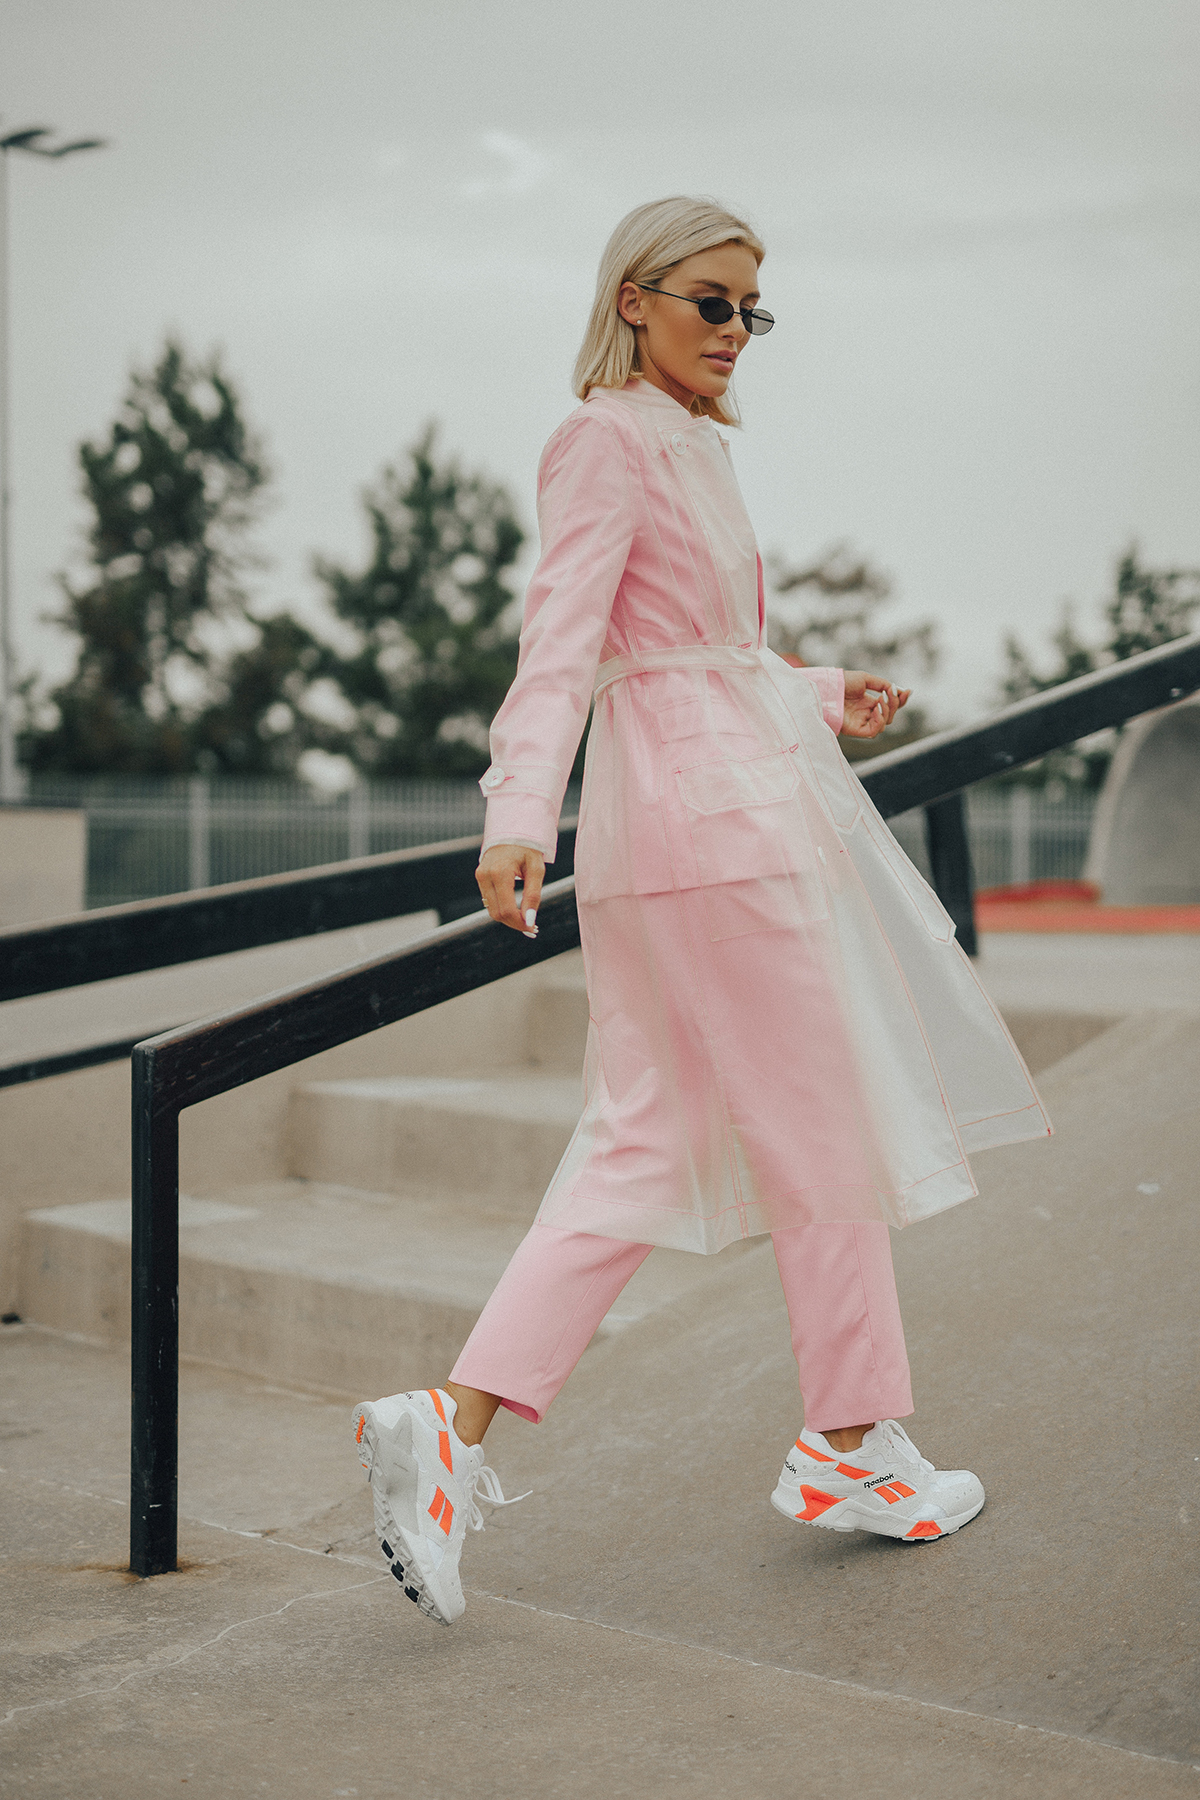 Blogger Sage Coralli wears the Reebok Aztrek sneakers and a pink power suit